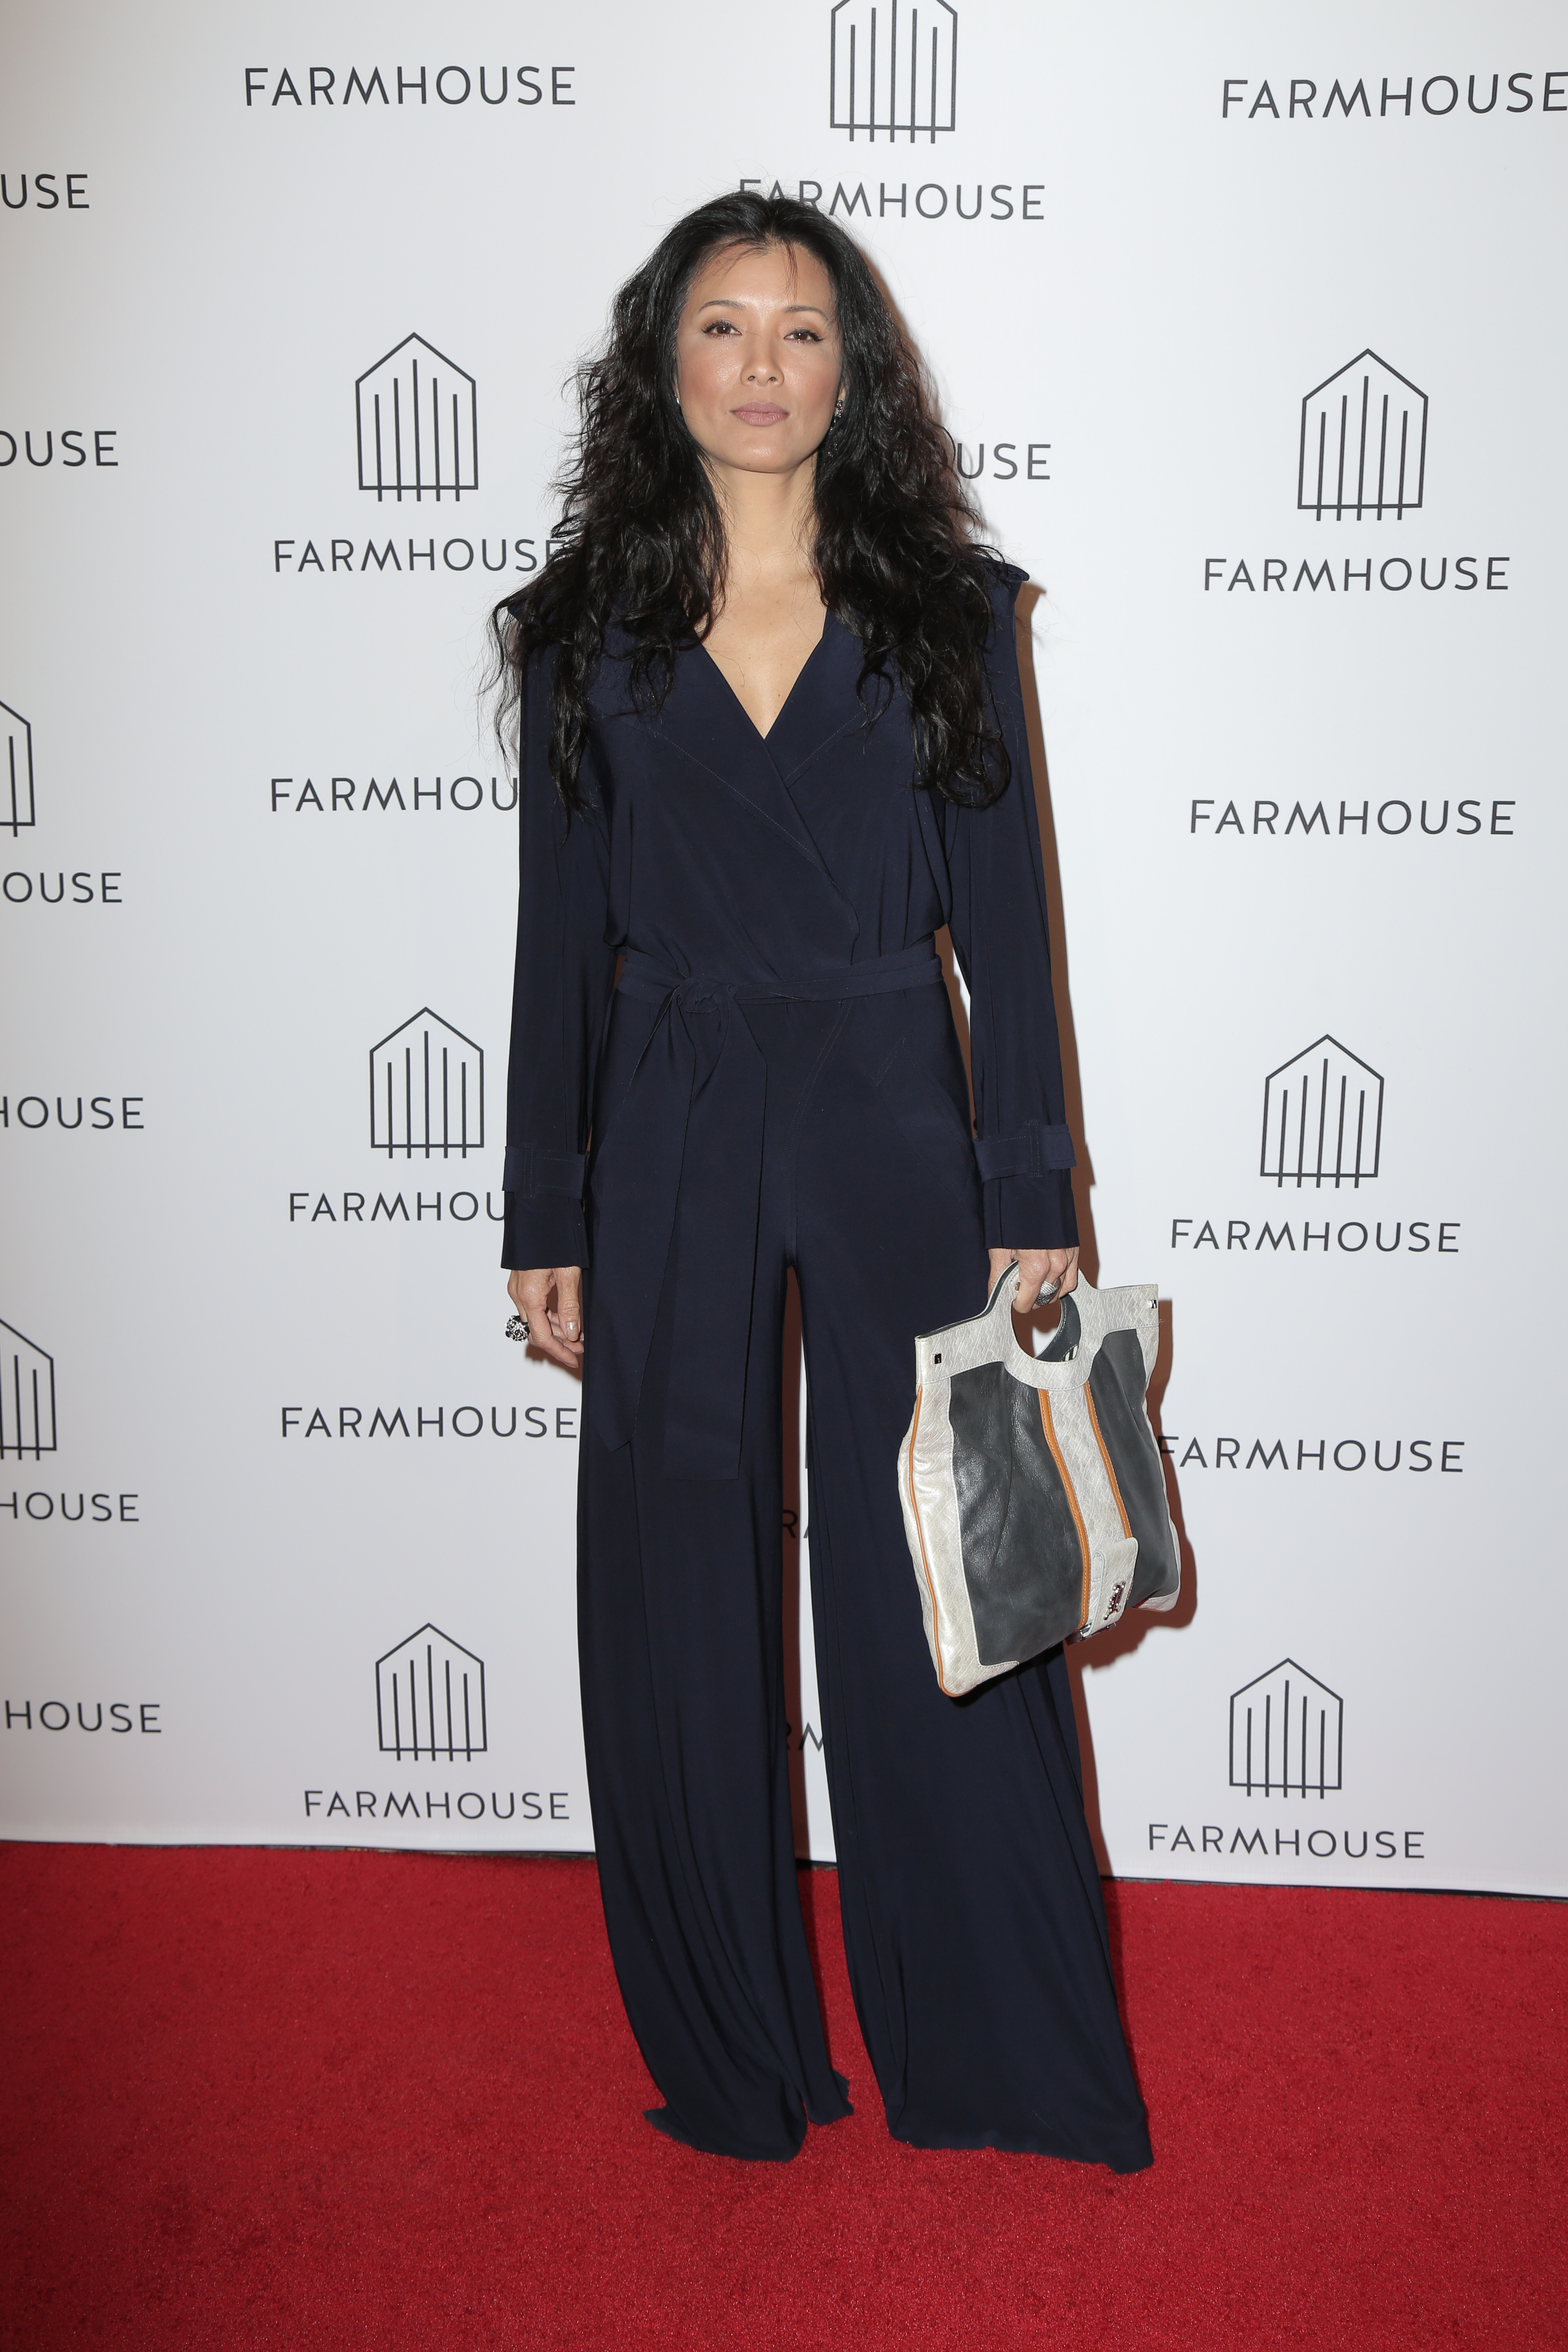 kelly-hu-grand-opening-of-farmhouse-held-at-the-beverly-center-31518-1.jpg